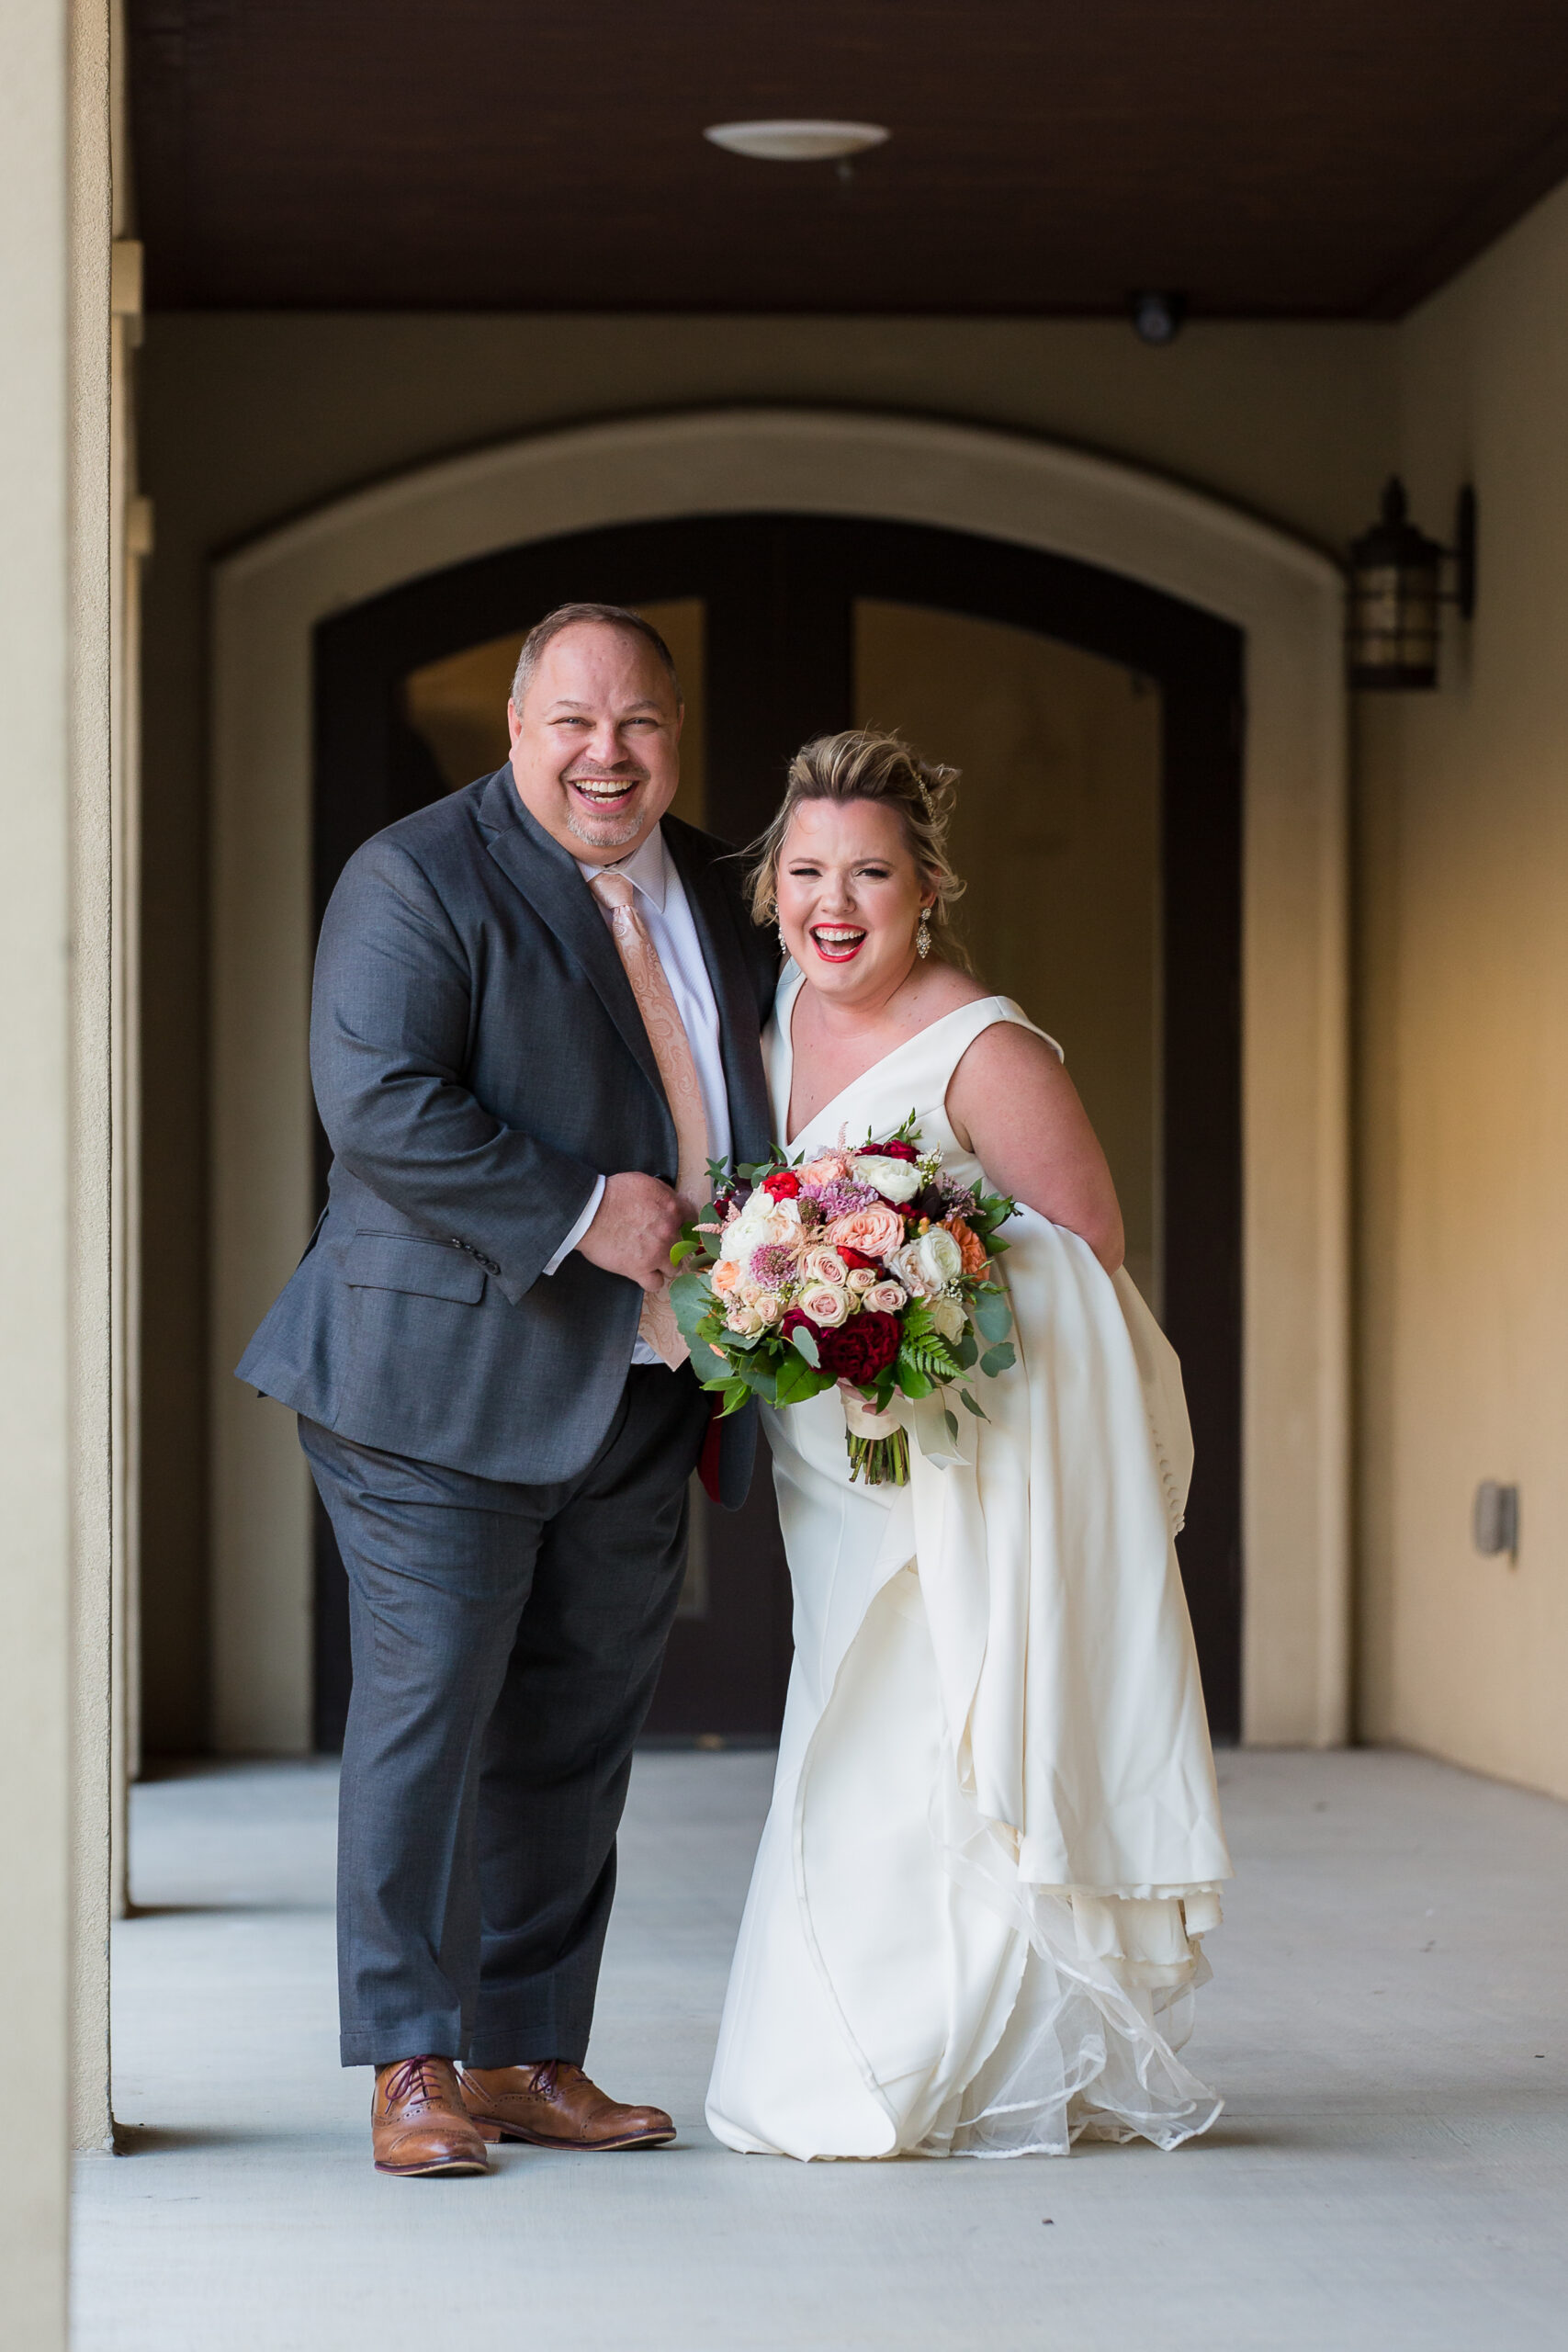 Dallas wedding photographer captures bride and groom walking down a corridor together together with the bride holding her train and a bouquet as they look over their shoulders laughing for their Dallas wedding day